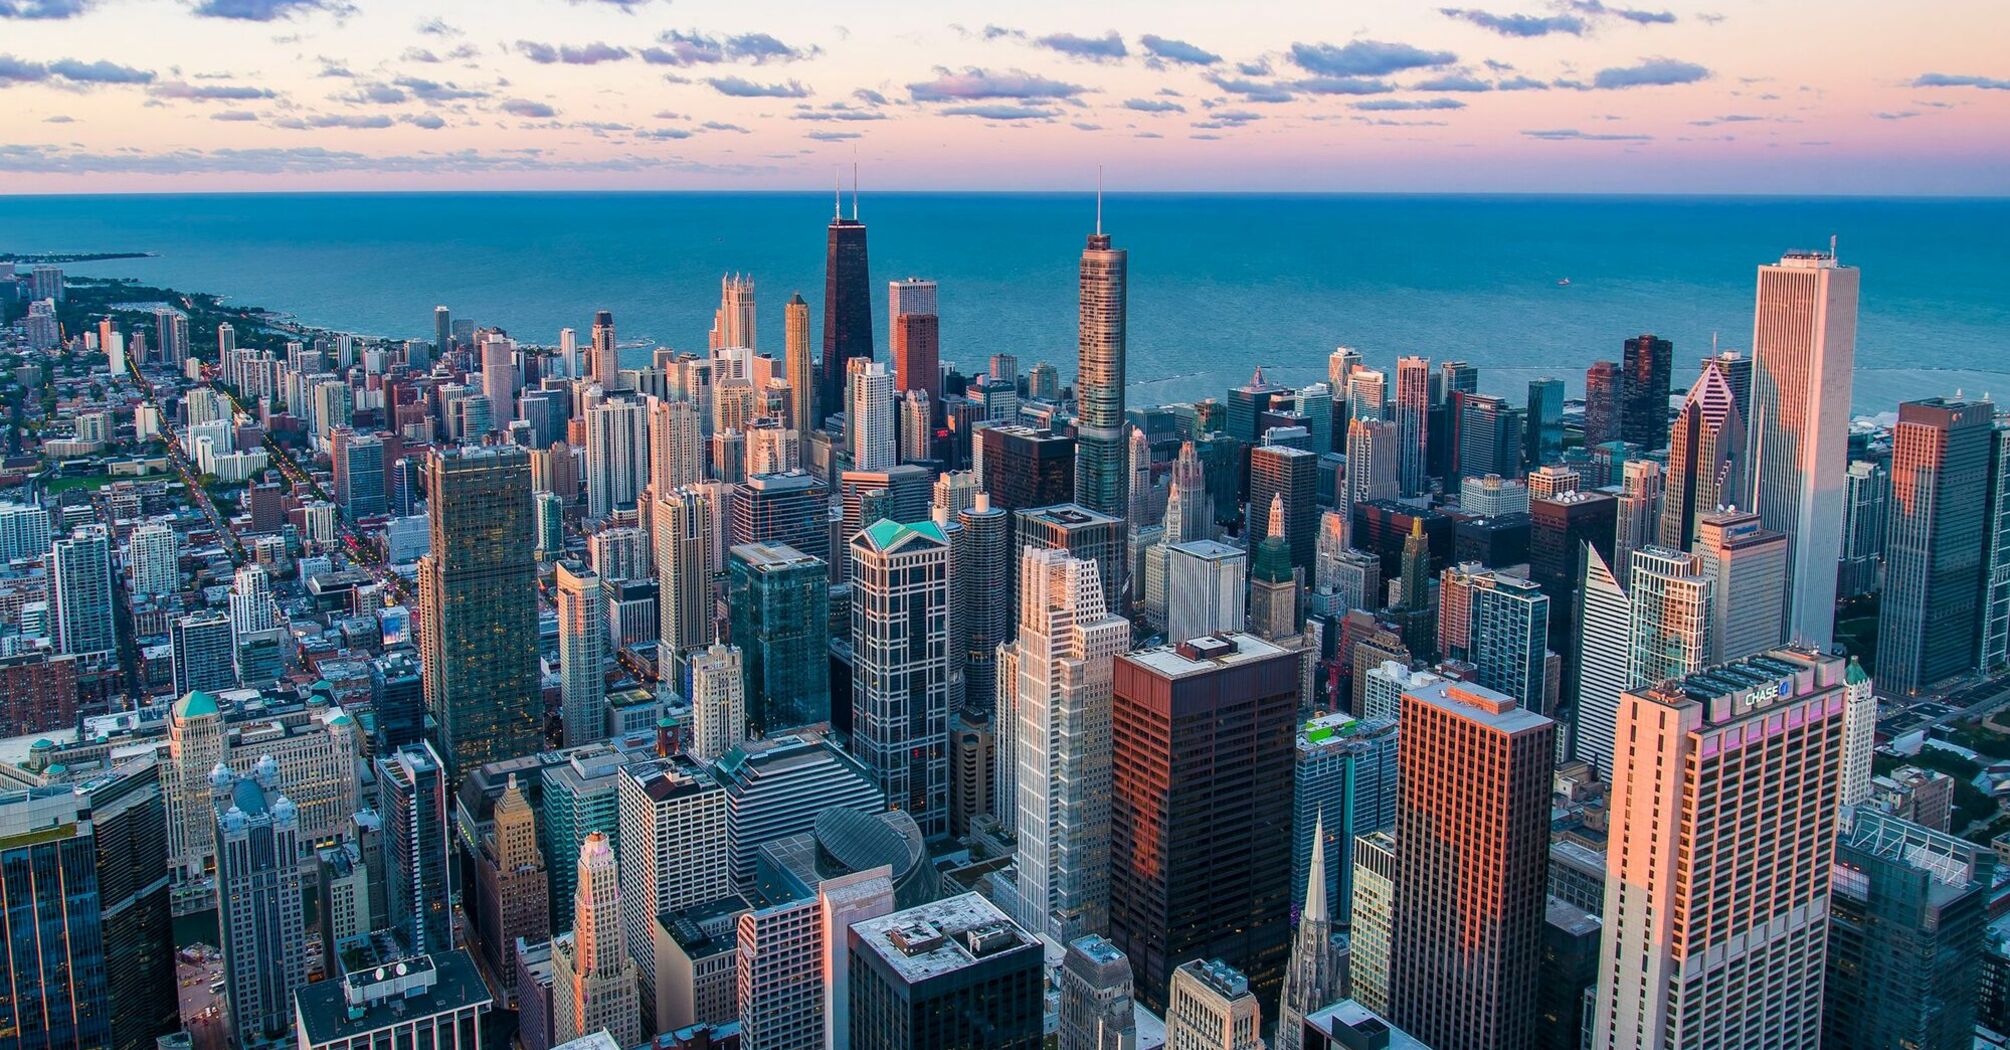 Aerial view of Chicago skyline at dusk with Lake Michigan